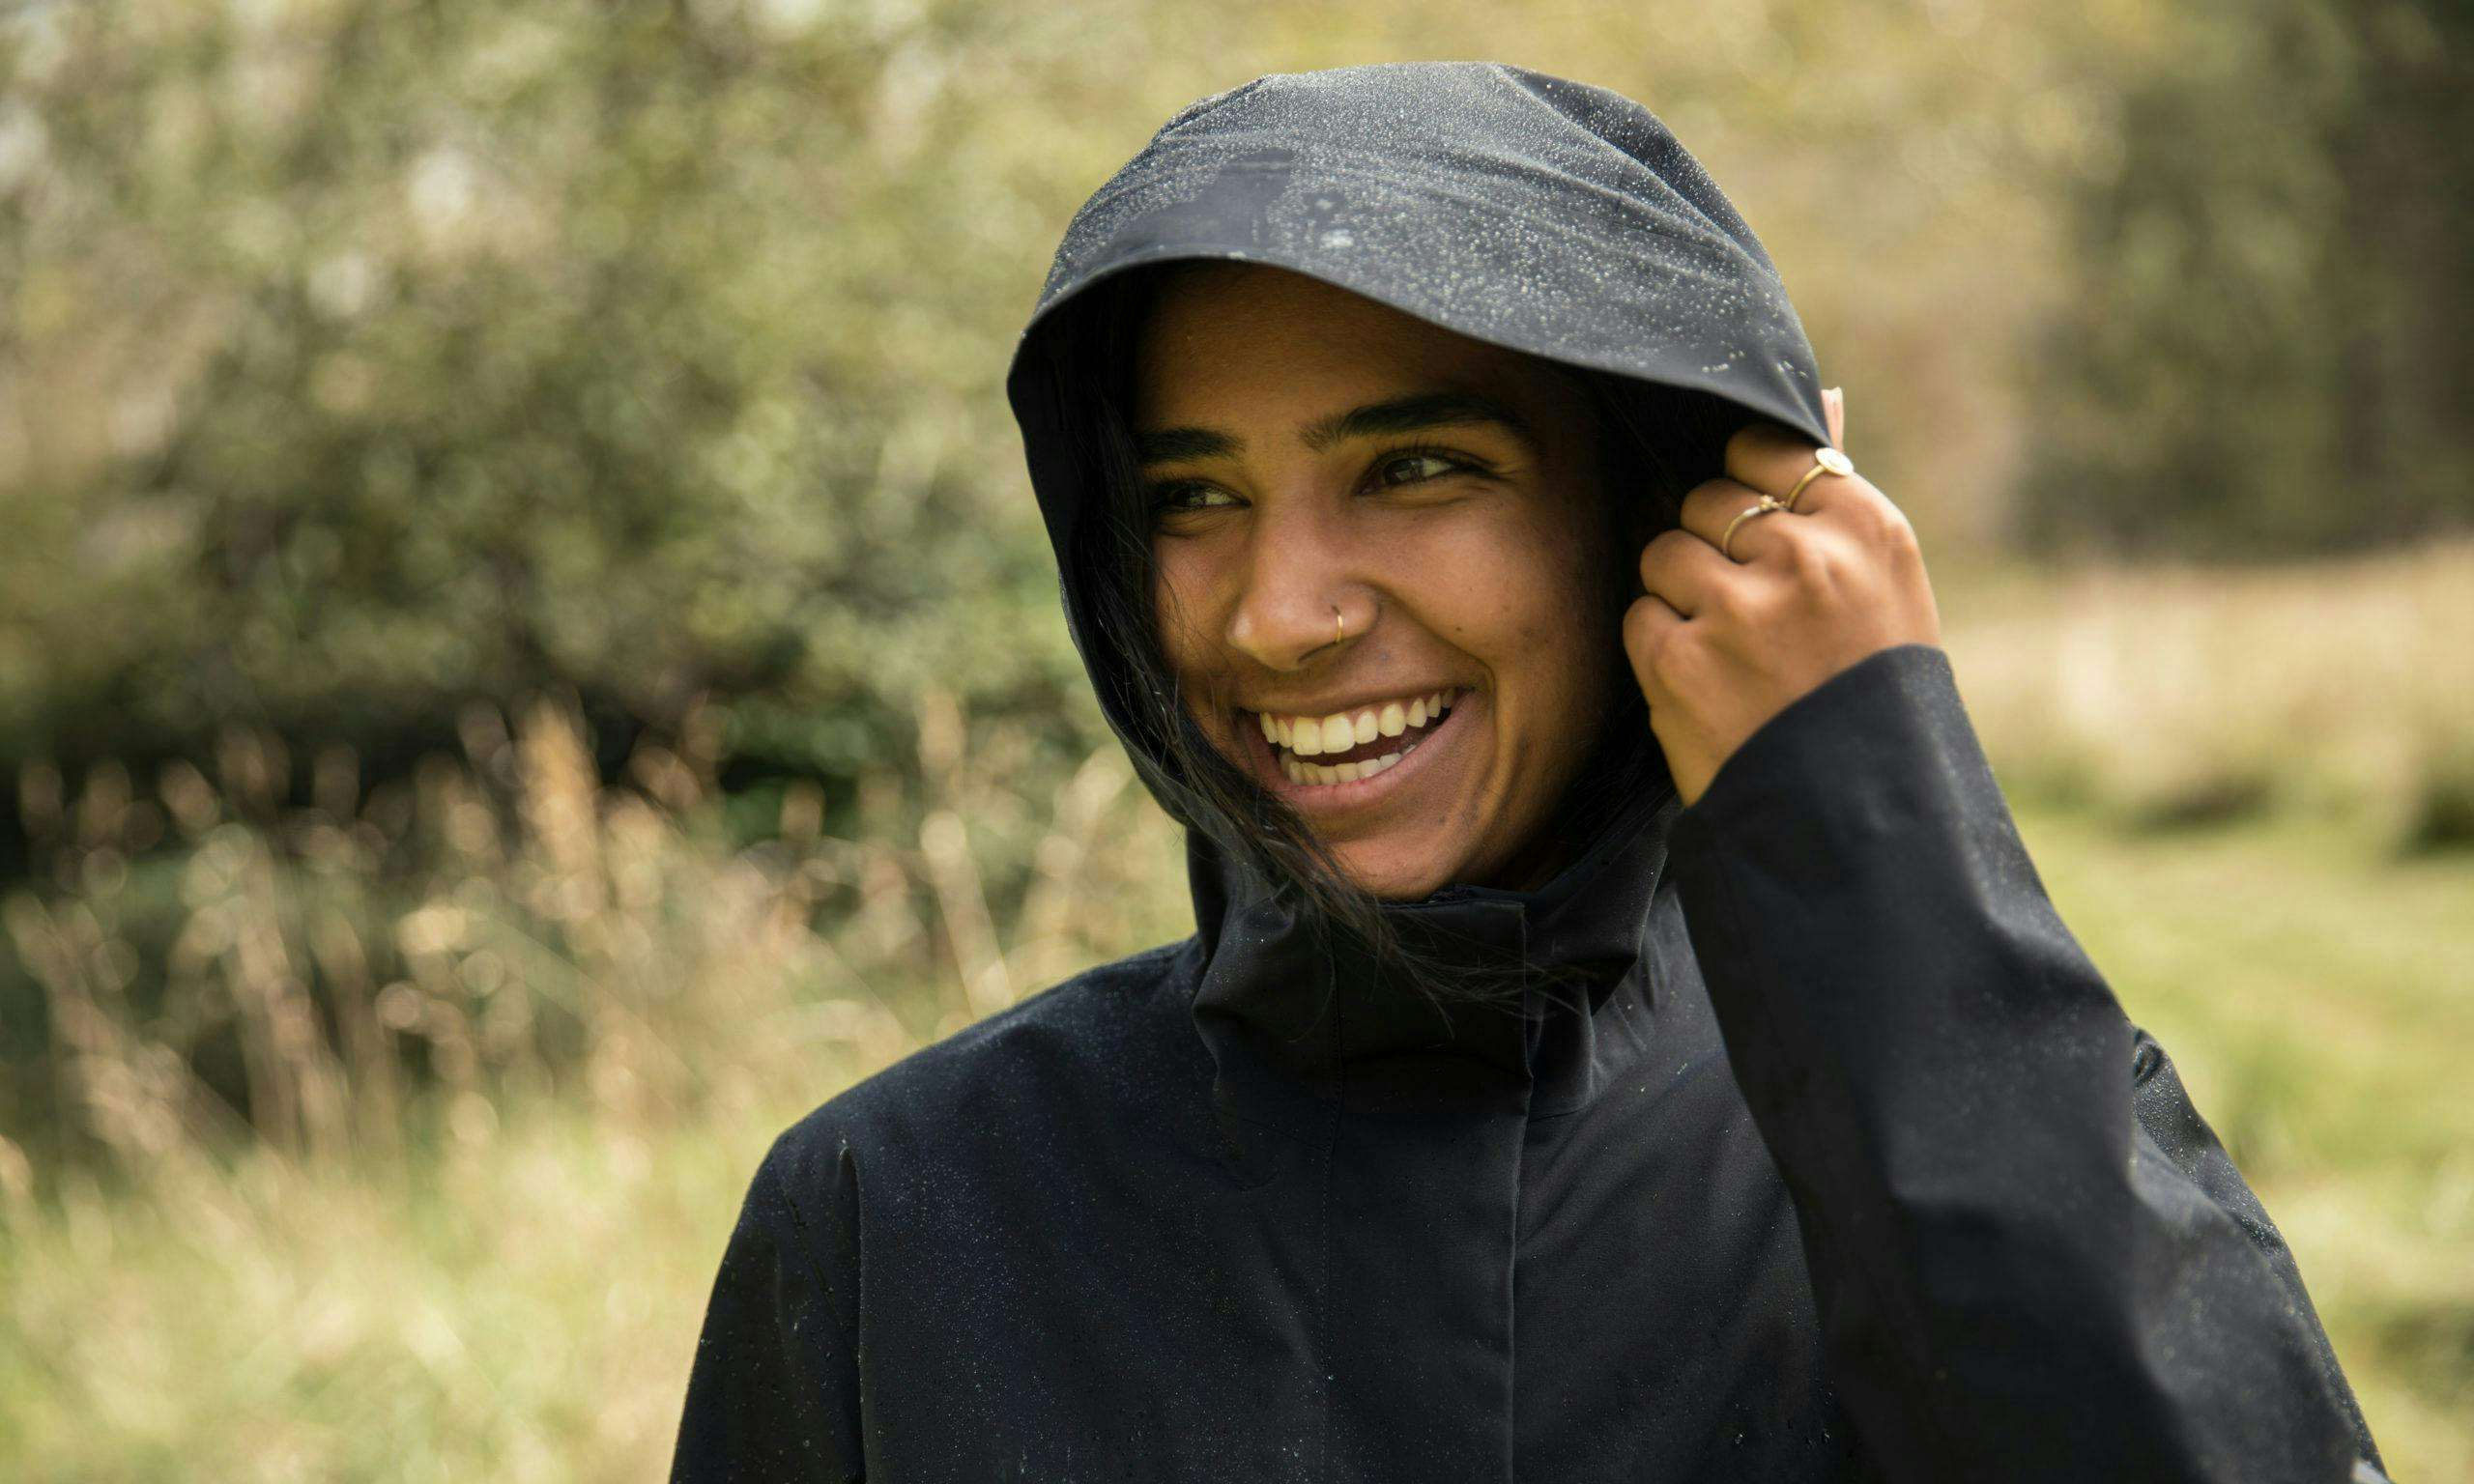 Smiling person wearing a rain jacket with water beading on the hood